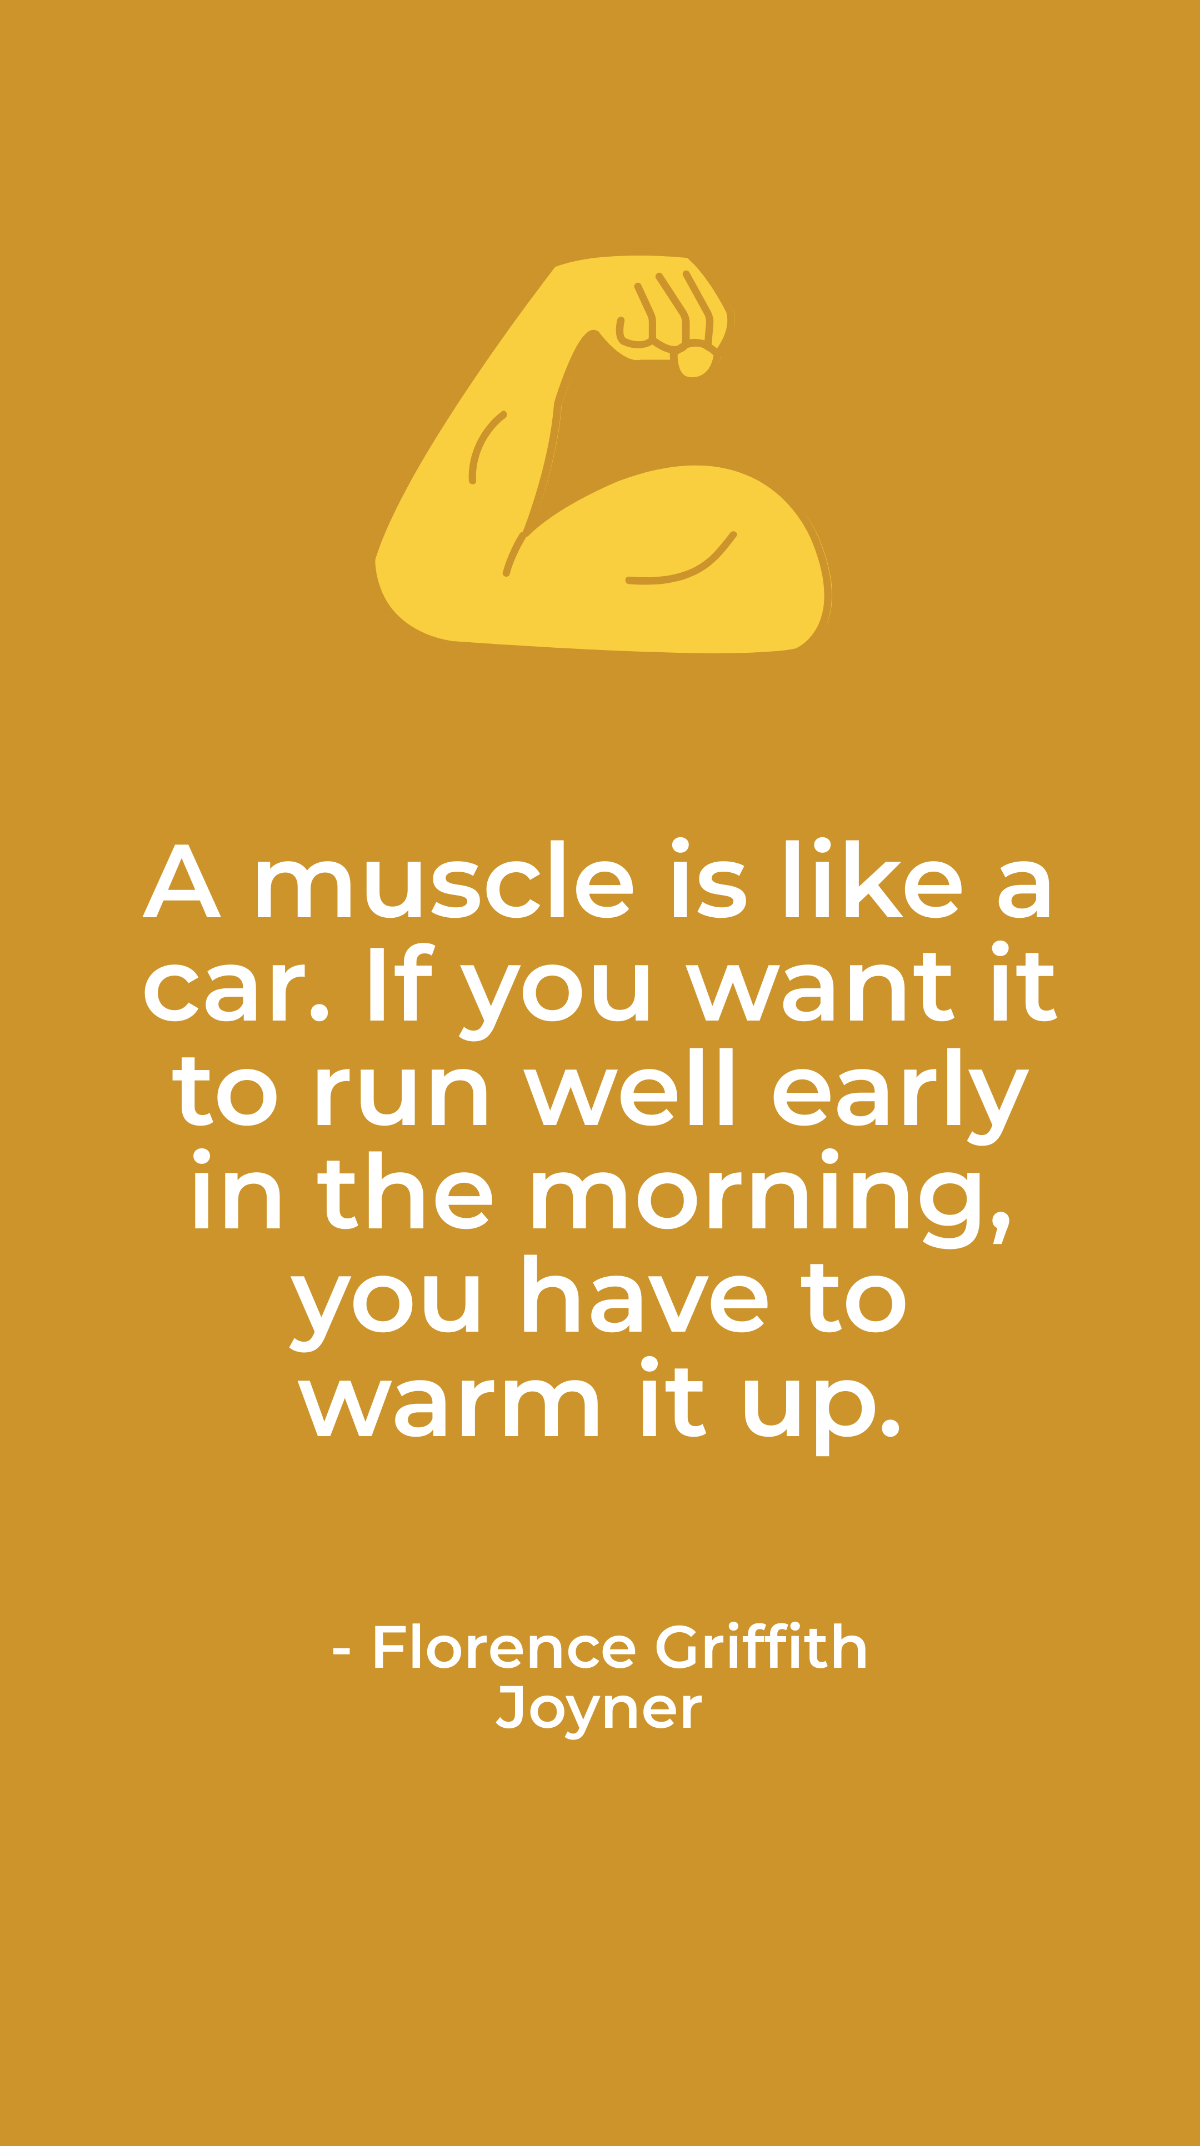 Florence Griffith Joyner - A muscle is like a car. If you want it to run well early in the morning, you have to warm it up.